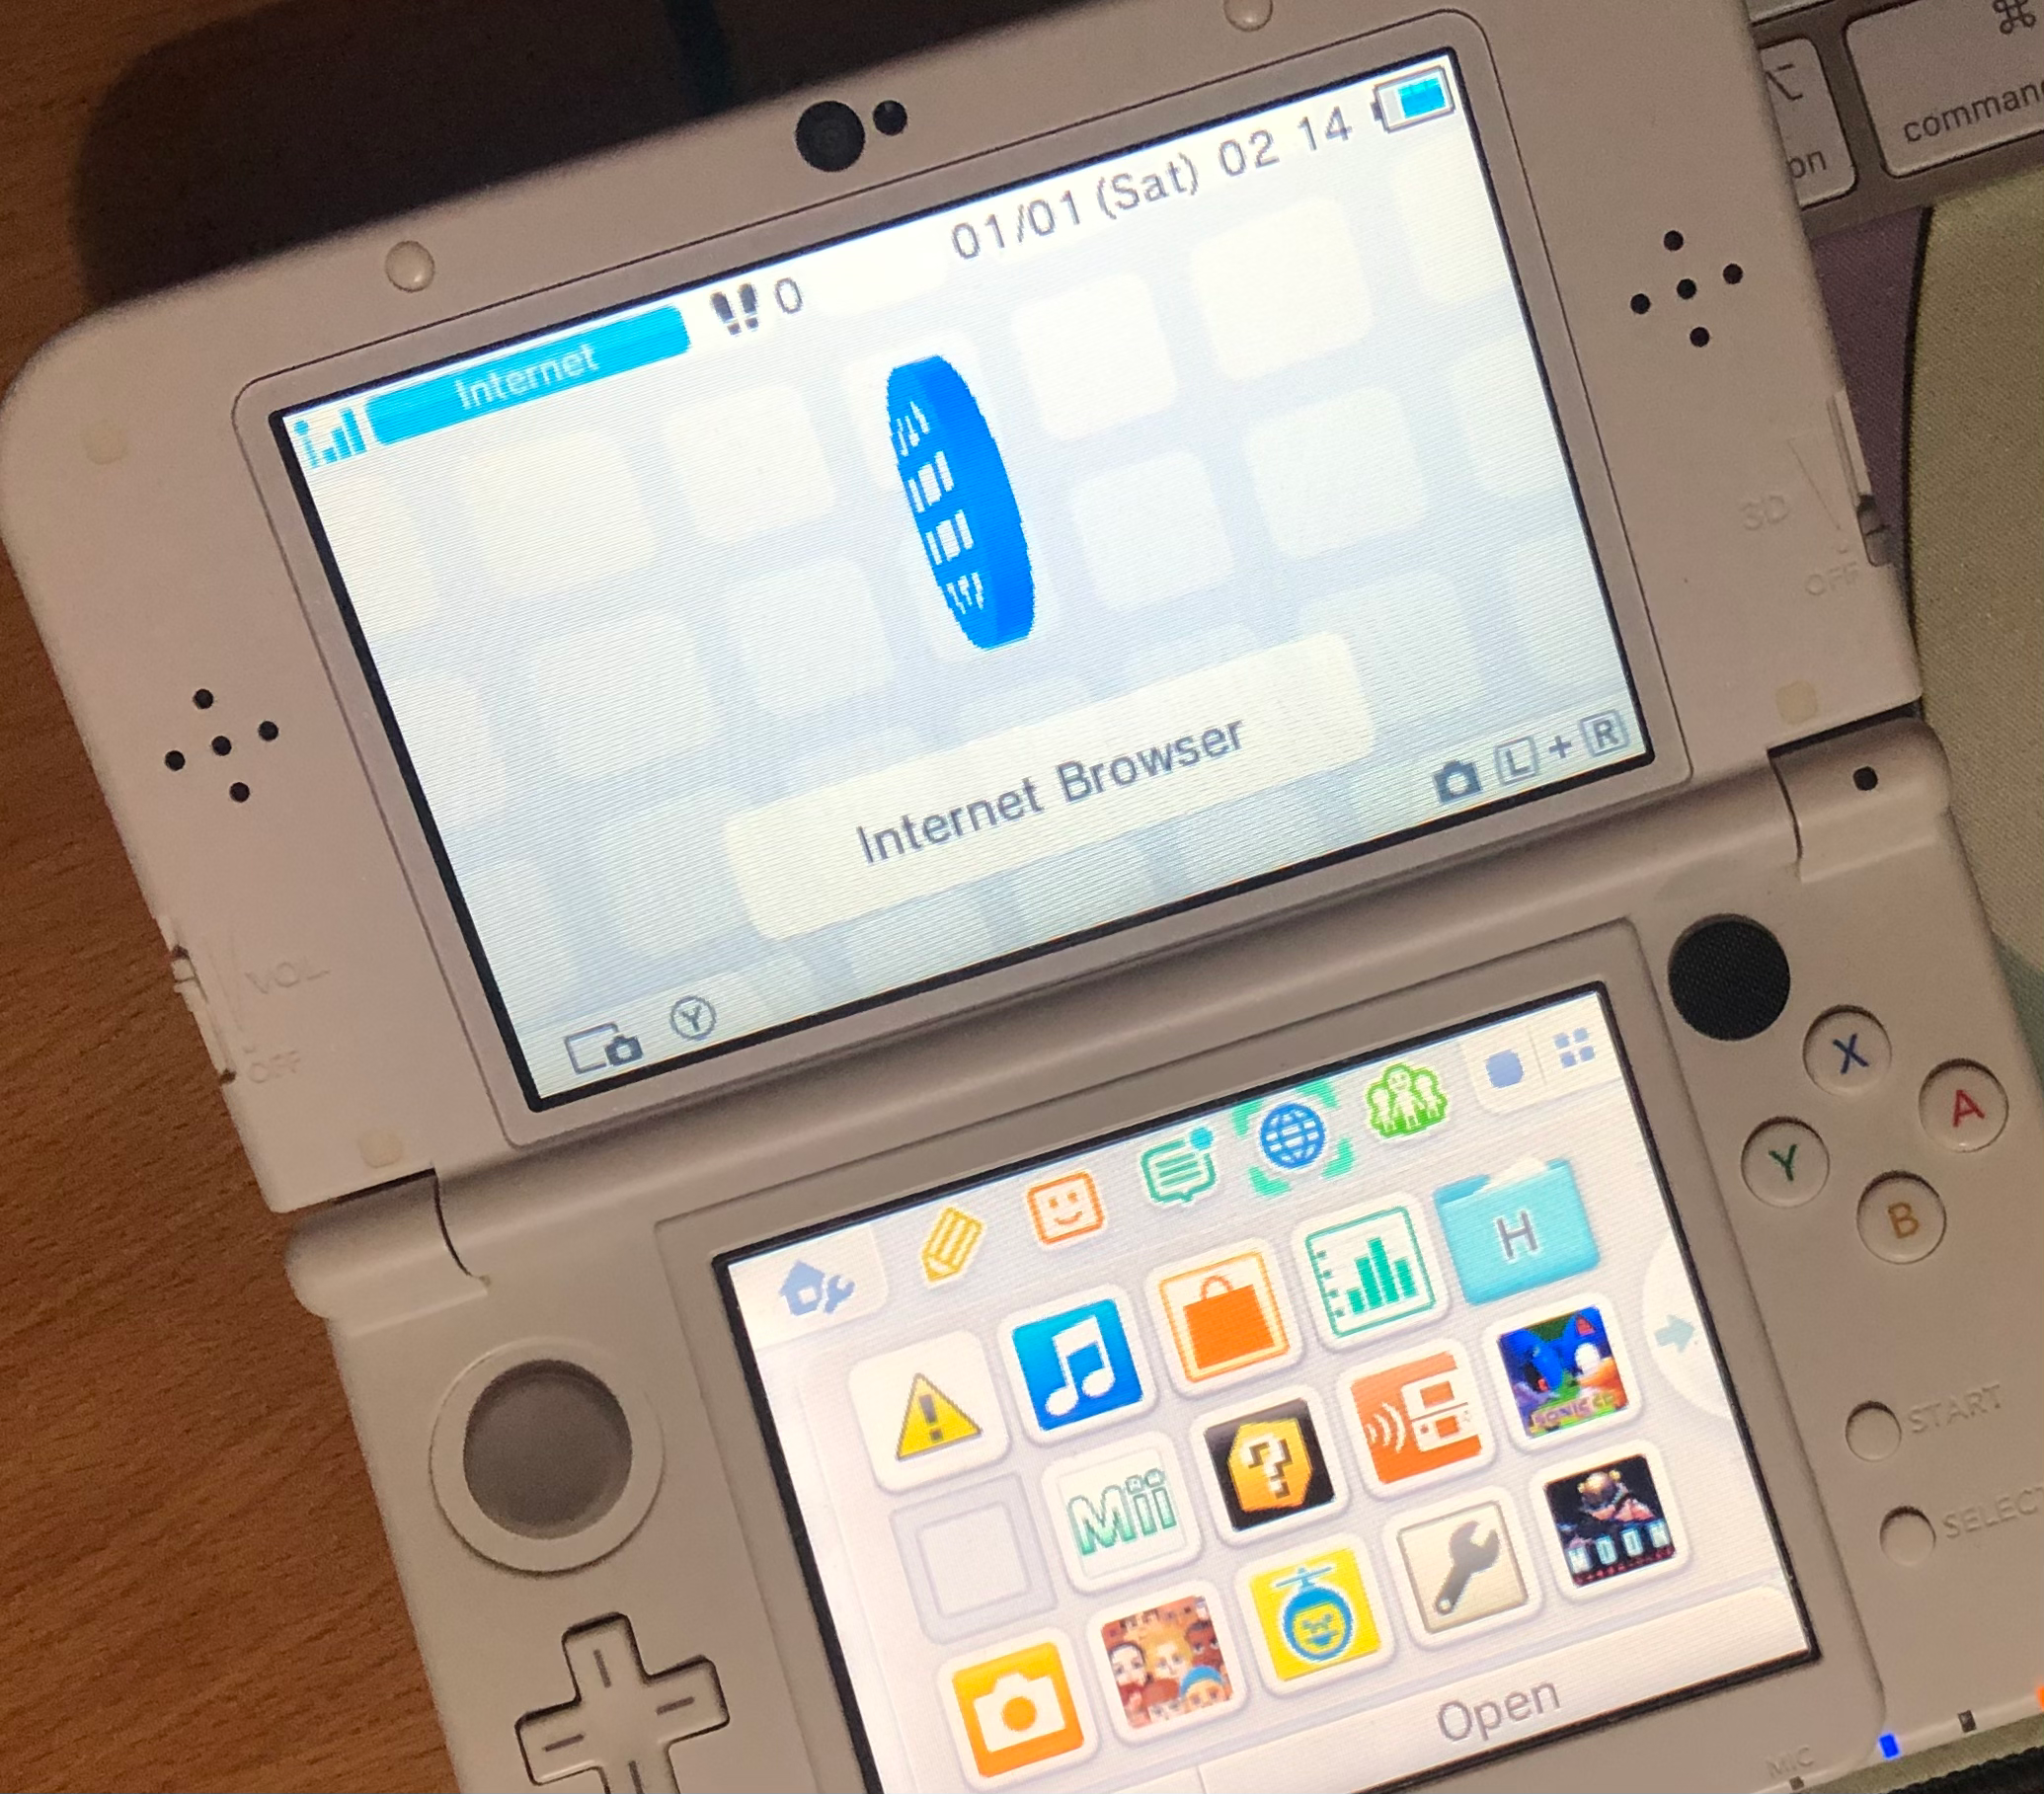 Modding New 3DS XL with PSP-1000 Analog Stick (Also Works on Other "New"  Systems!) | GBAtemp.net - The Independent Video Game Community